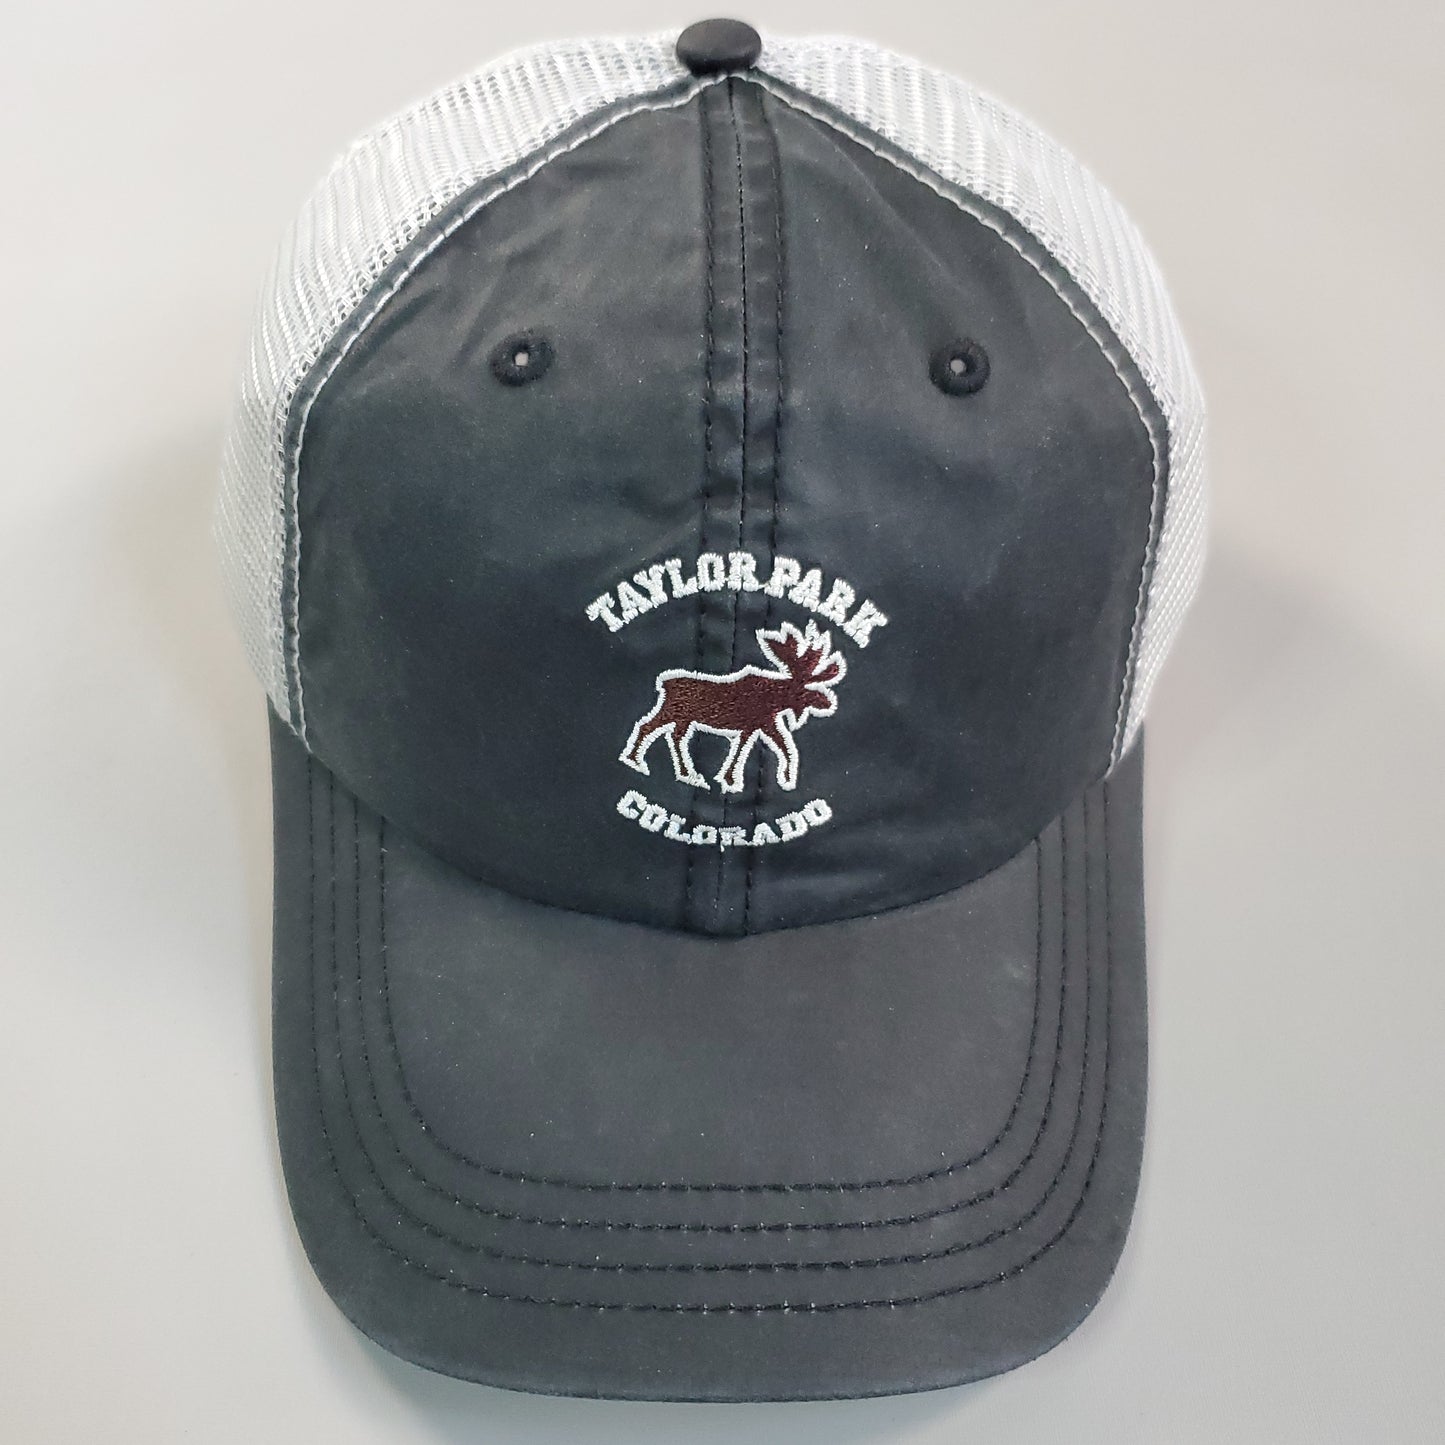 TAYLOR PARK COLORADO Black Gray Hat One Size Fits All By American Dry Goods Cap (New)